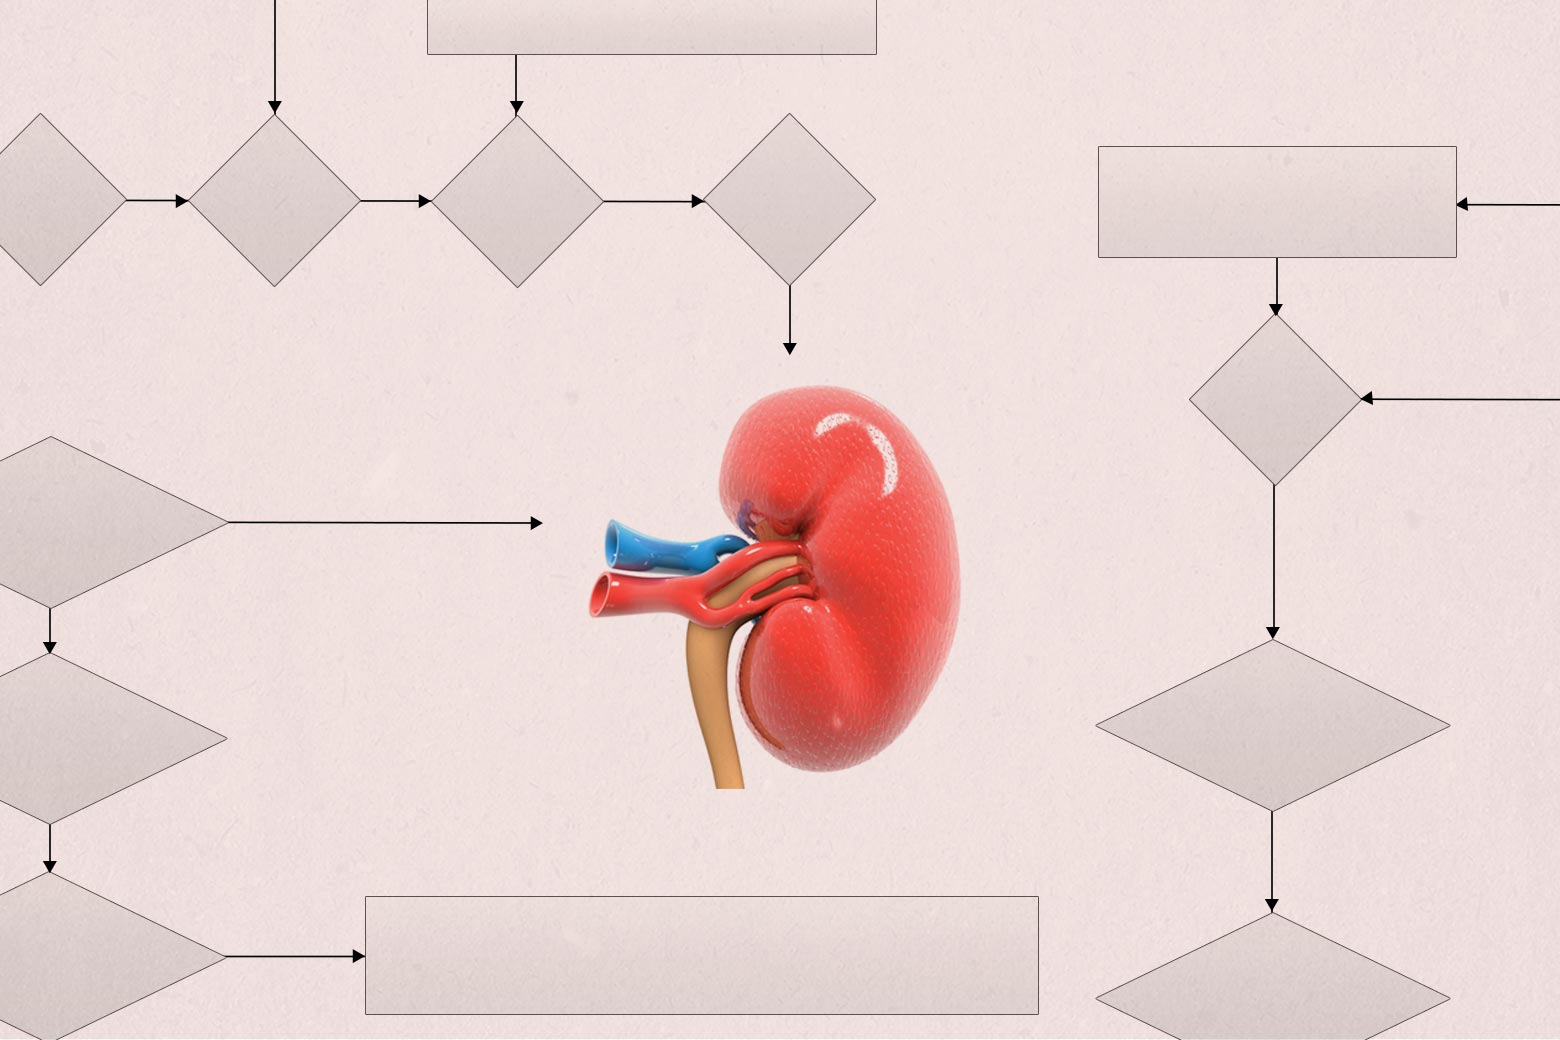 A kidney is surrounded by a series of boxes and arrows. 